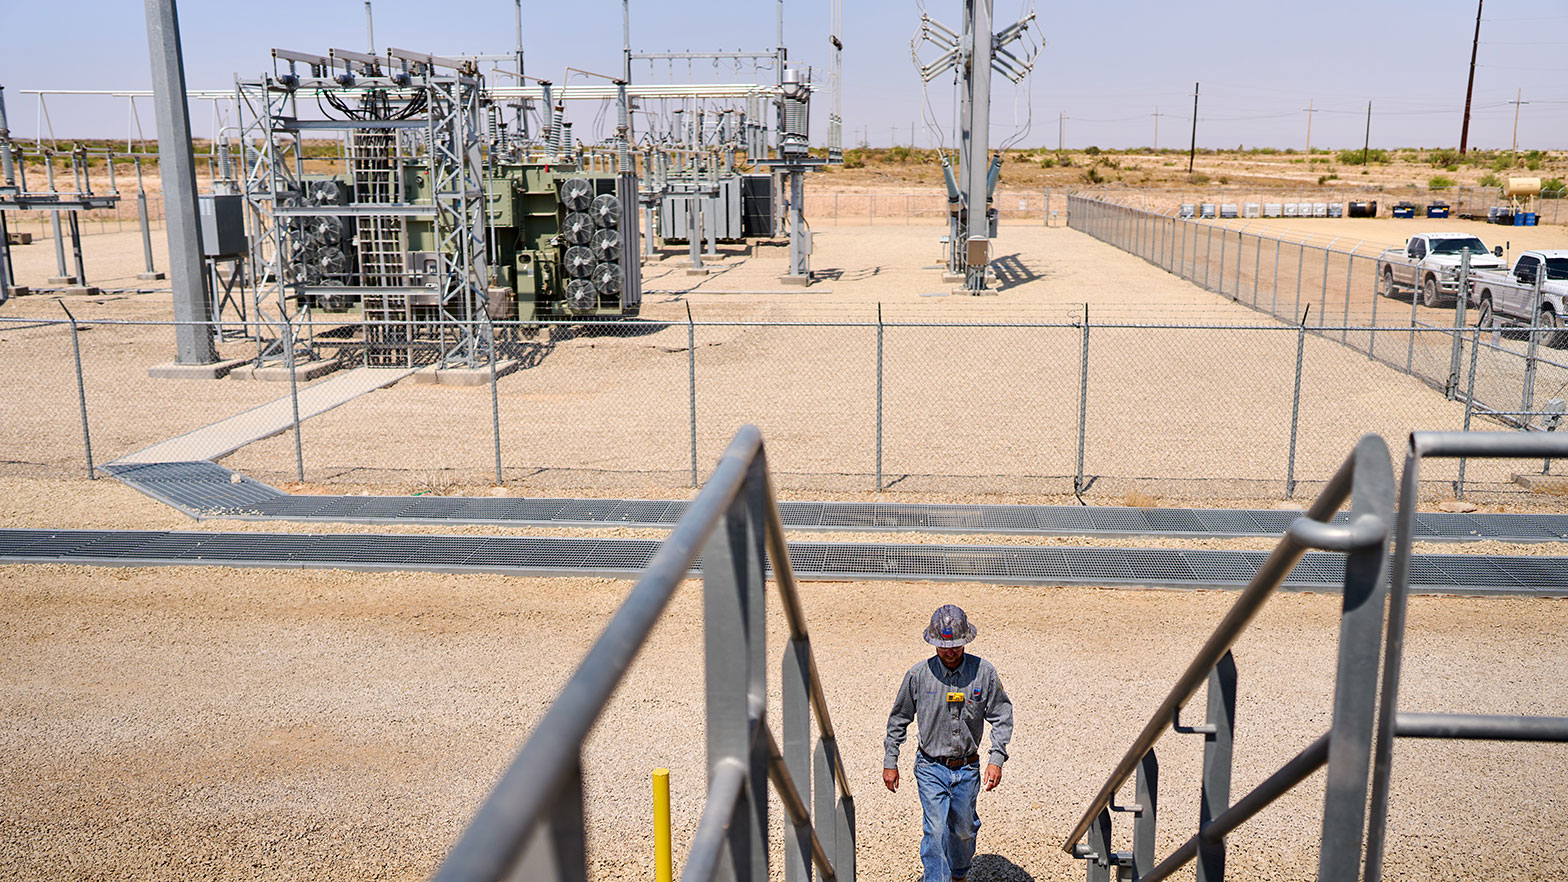 a chevron employees in a hard hat walks up the stairs near the permian basin structure